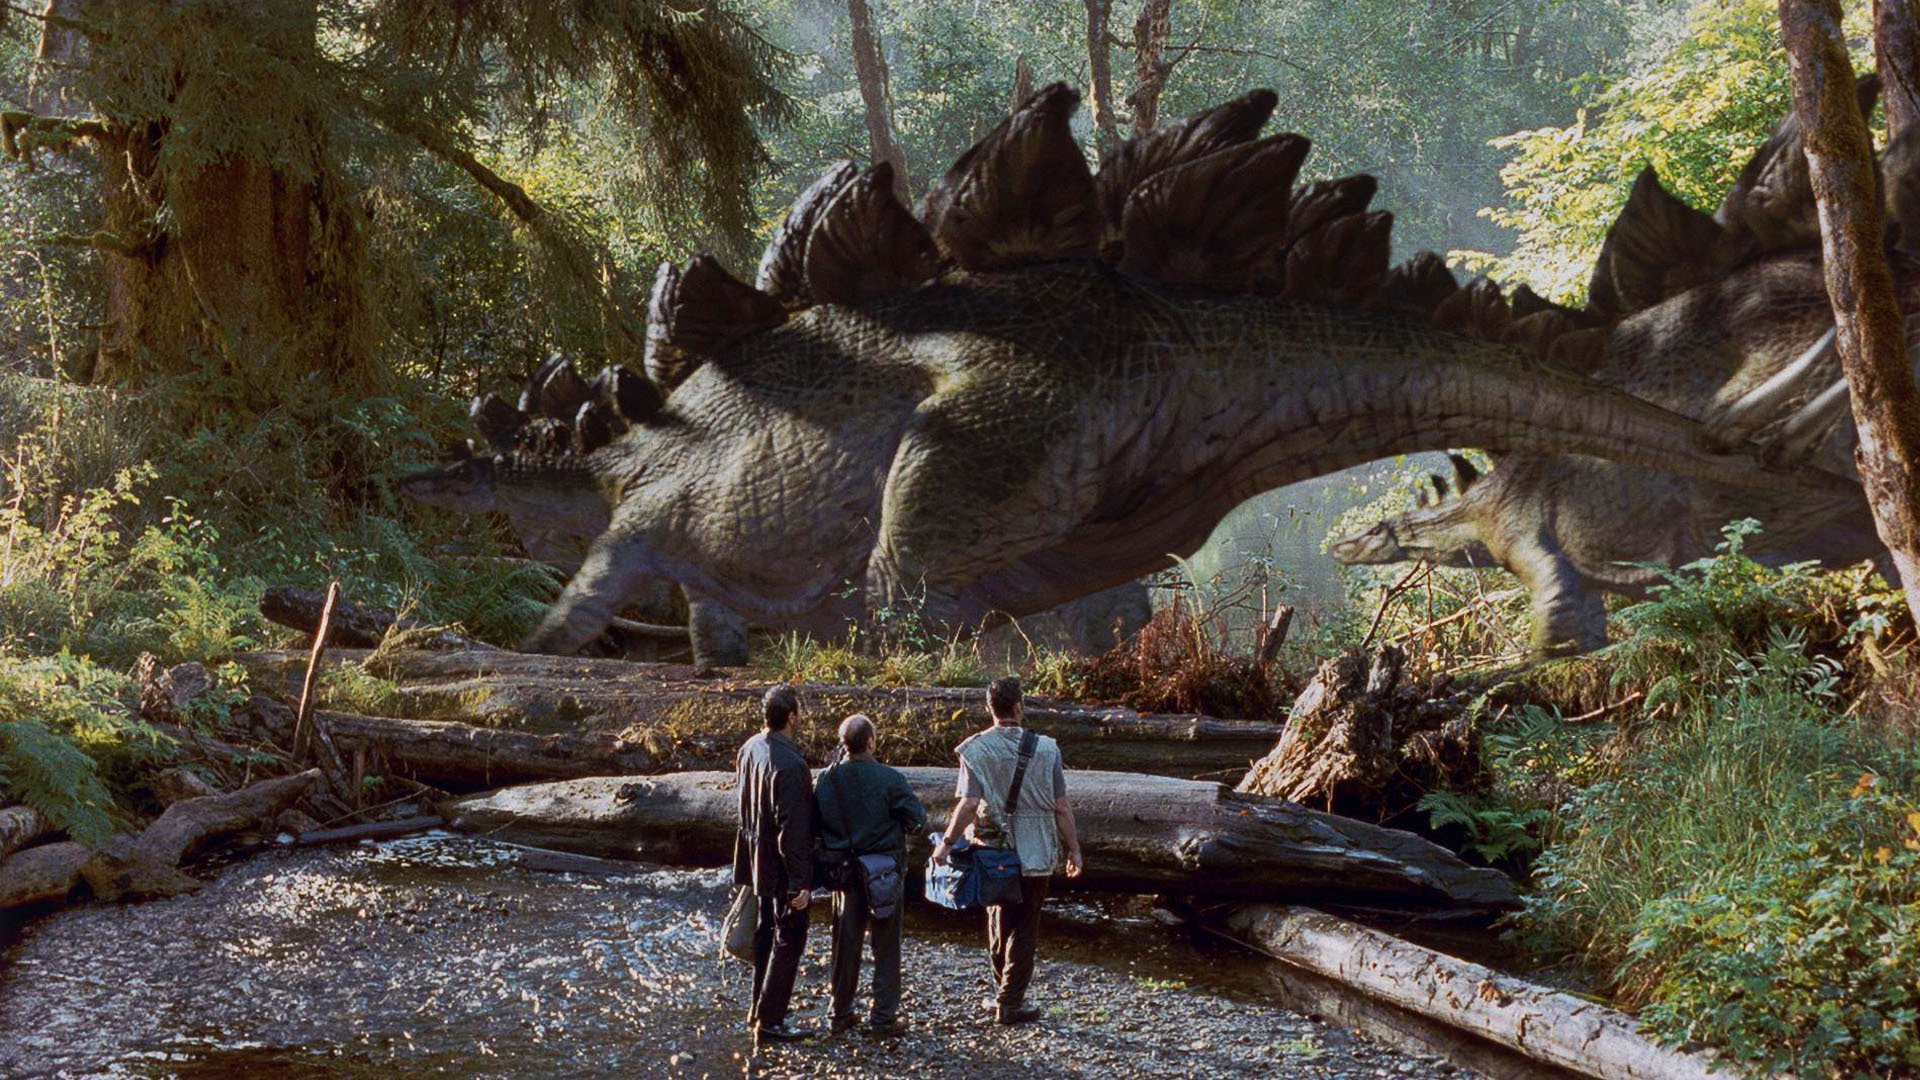 Jurassic World Streaming Guide: Where to Watch Online | Den of Geek